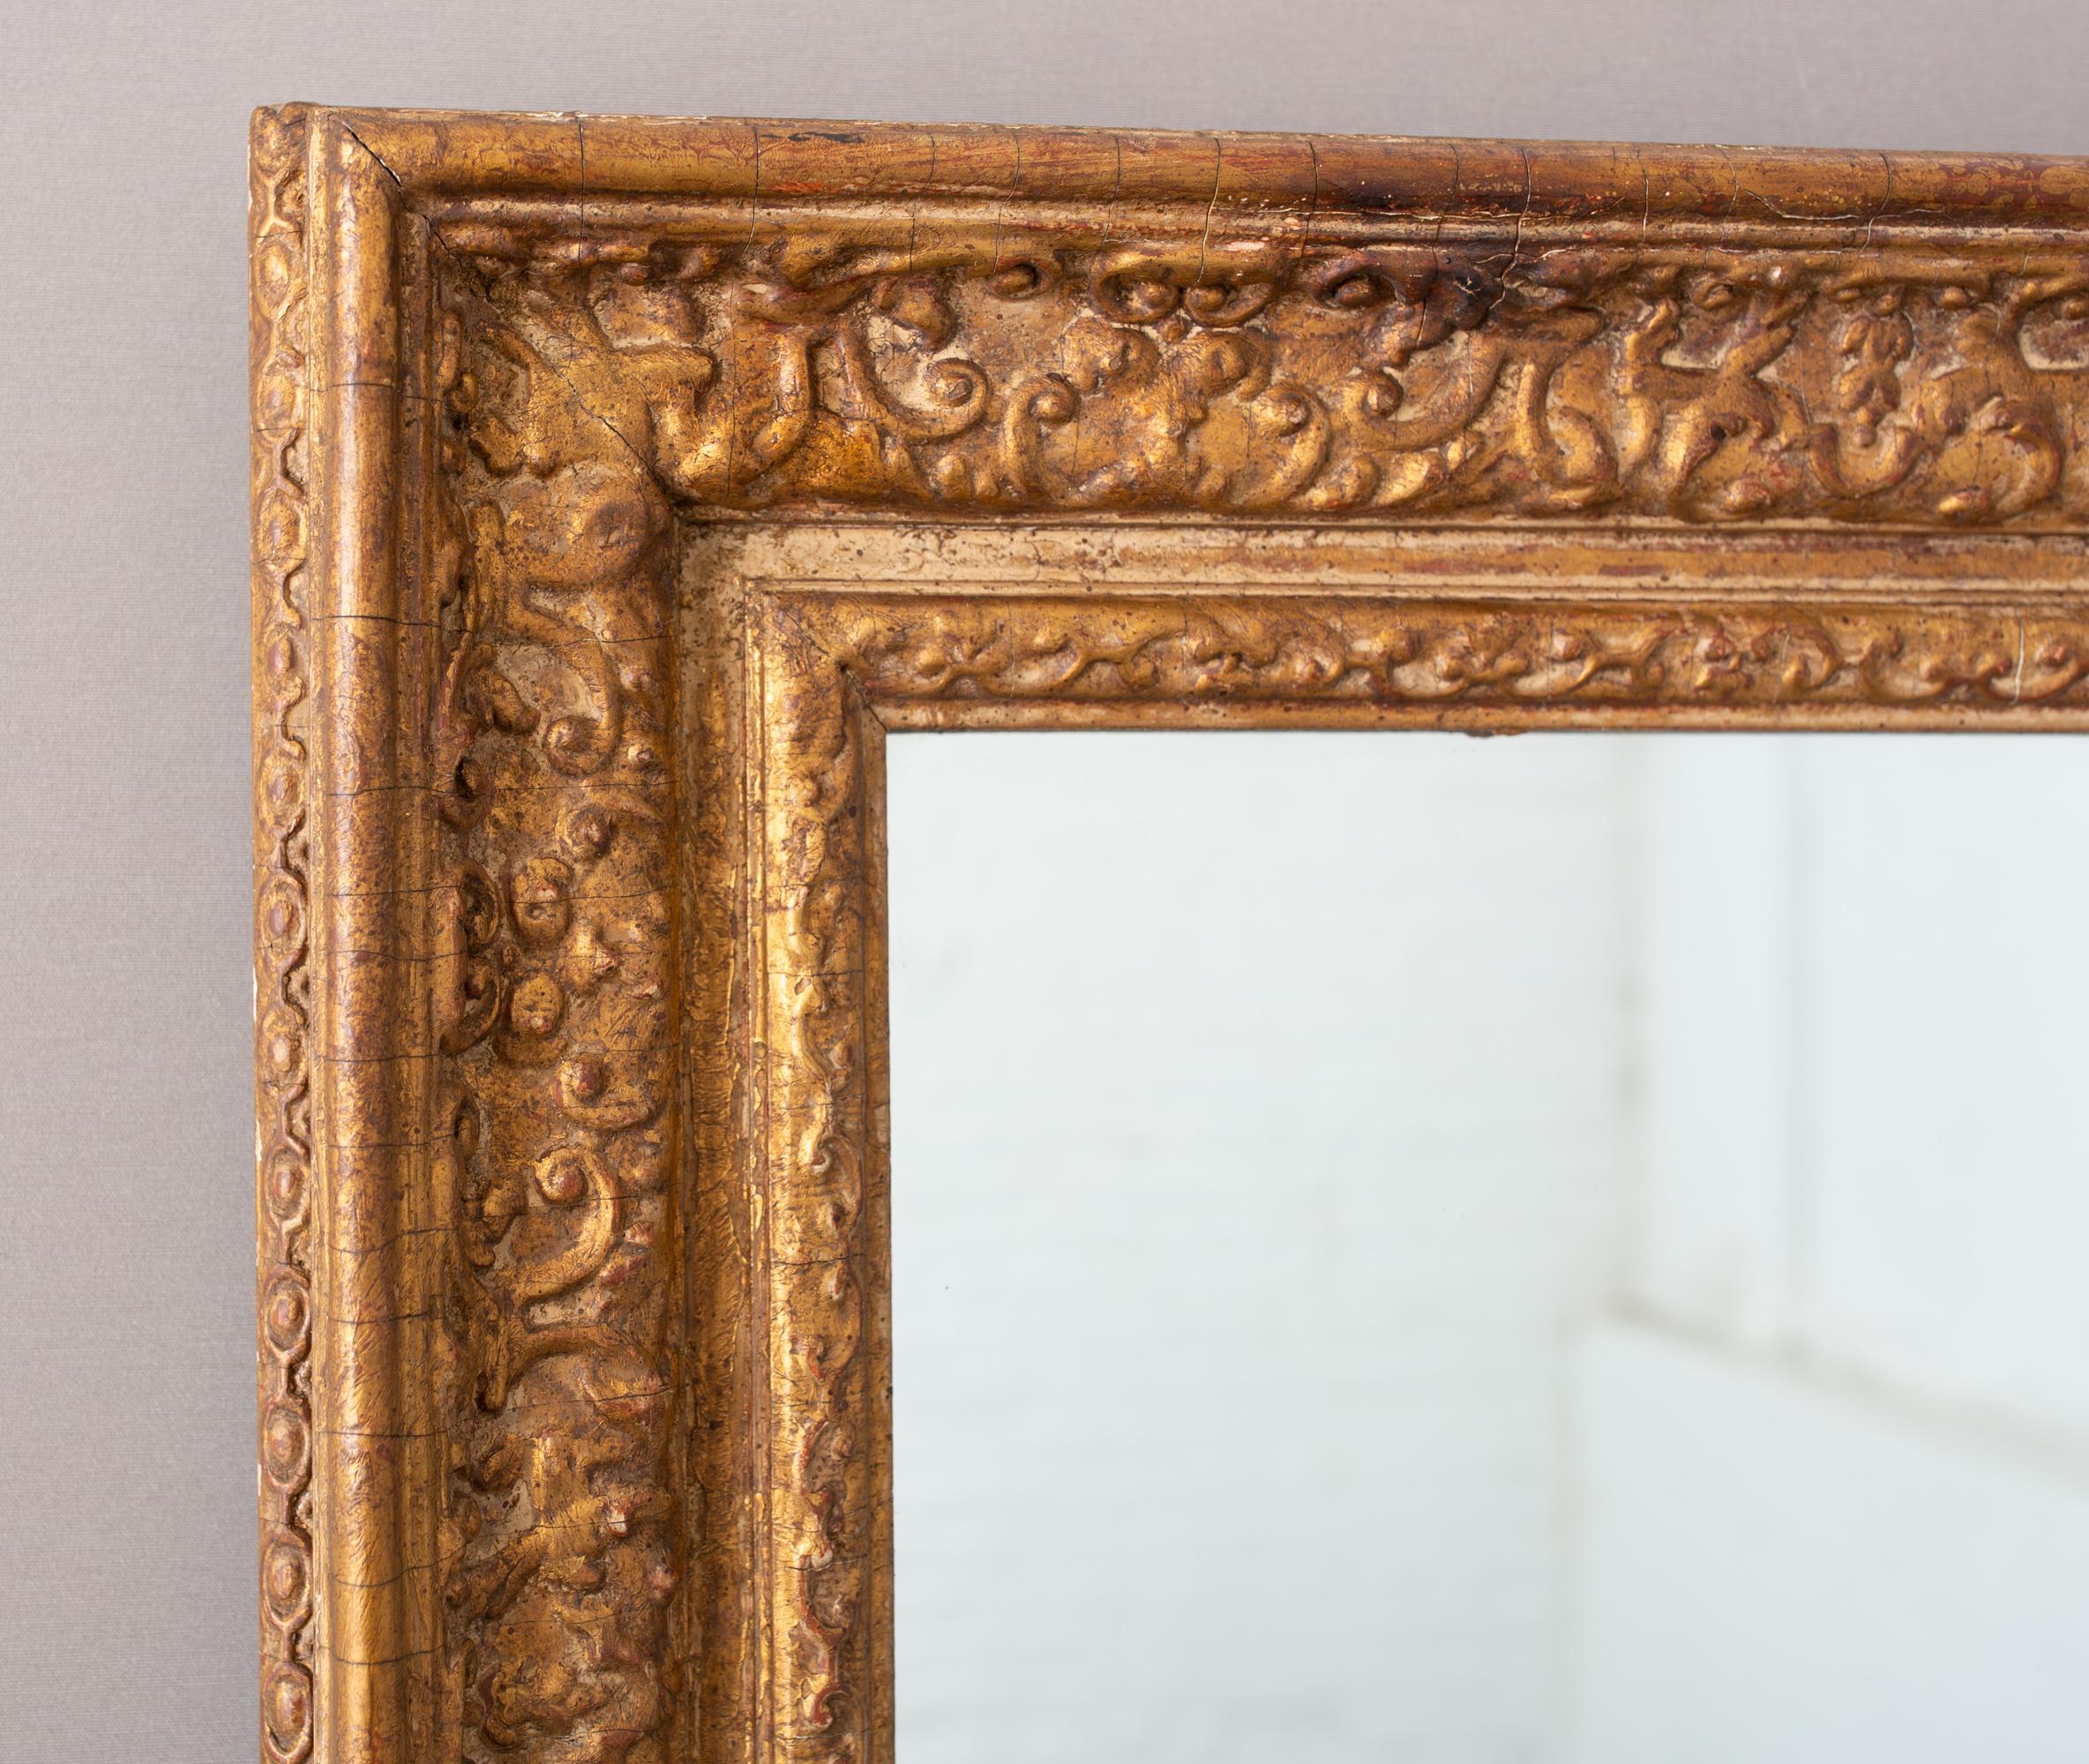 Early 20th century English gilt painted mirror with great age. Foxing detail to mirror. Wood in original condition. Some losses to wood but it all goes with the overall style of the mirror! Please see all photos.